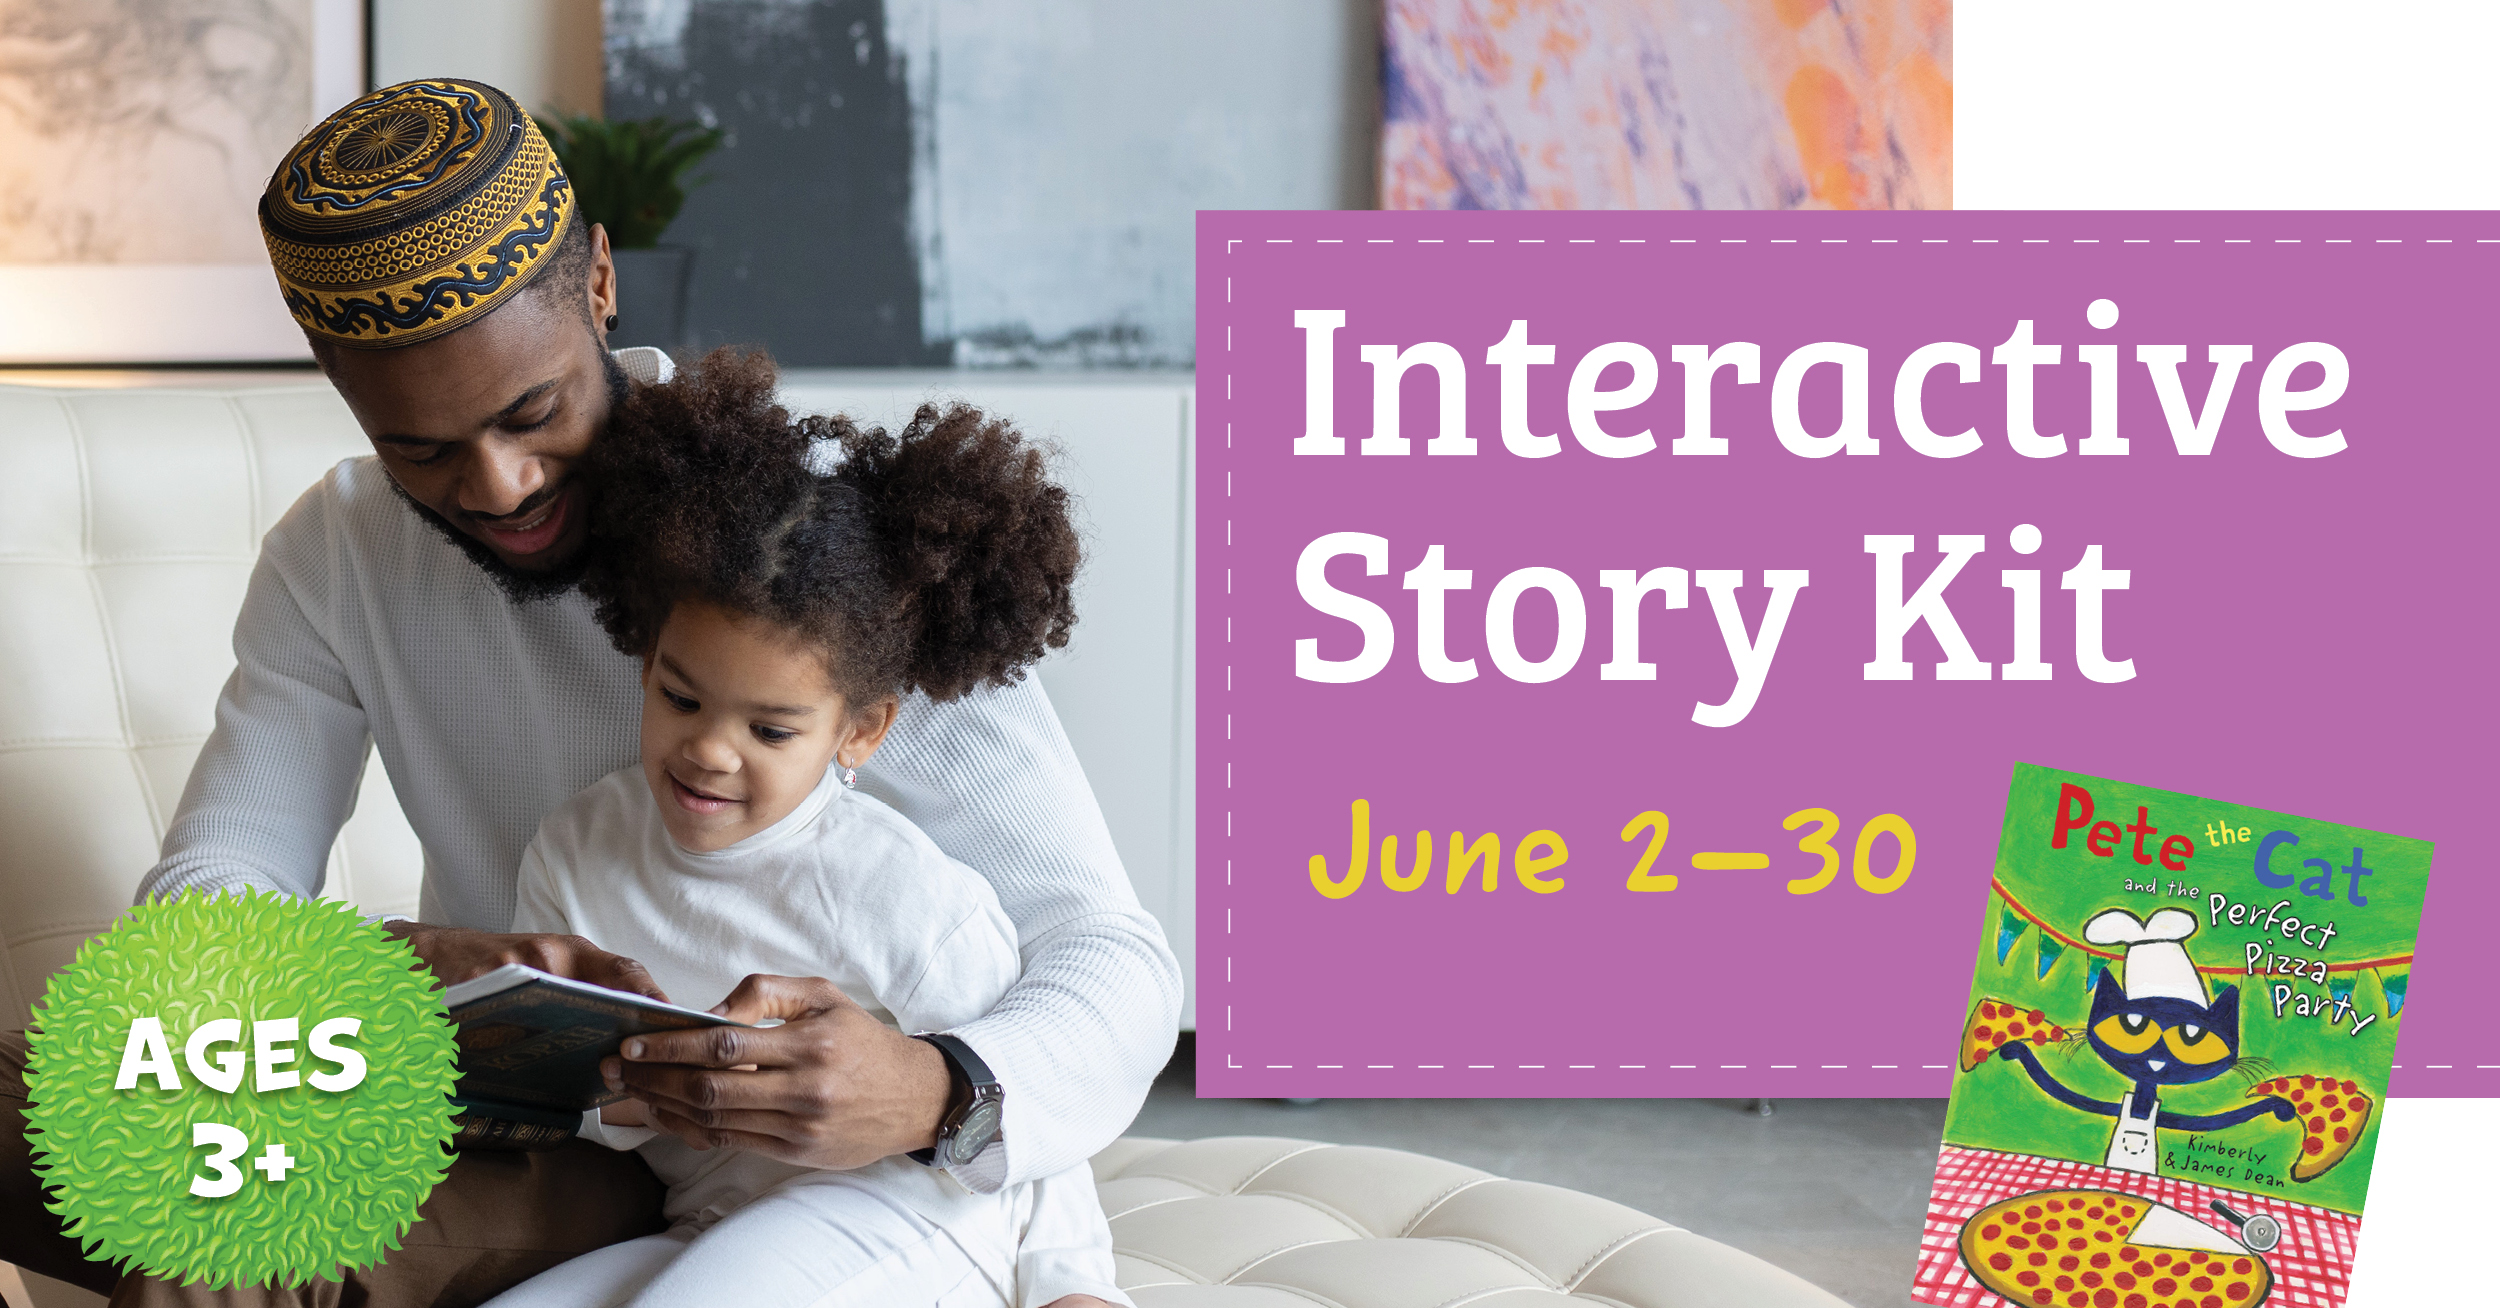 Interactive Story Kit. June second to june thirtieth. Ages 3+